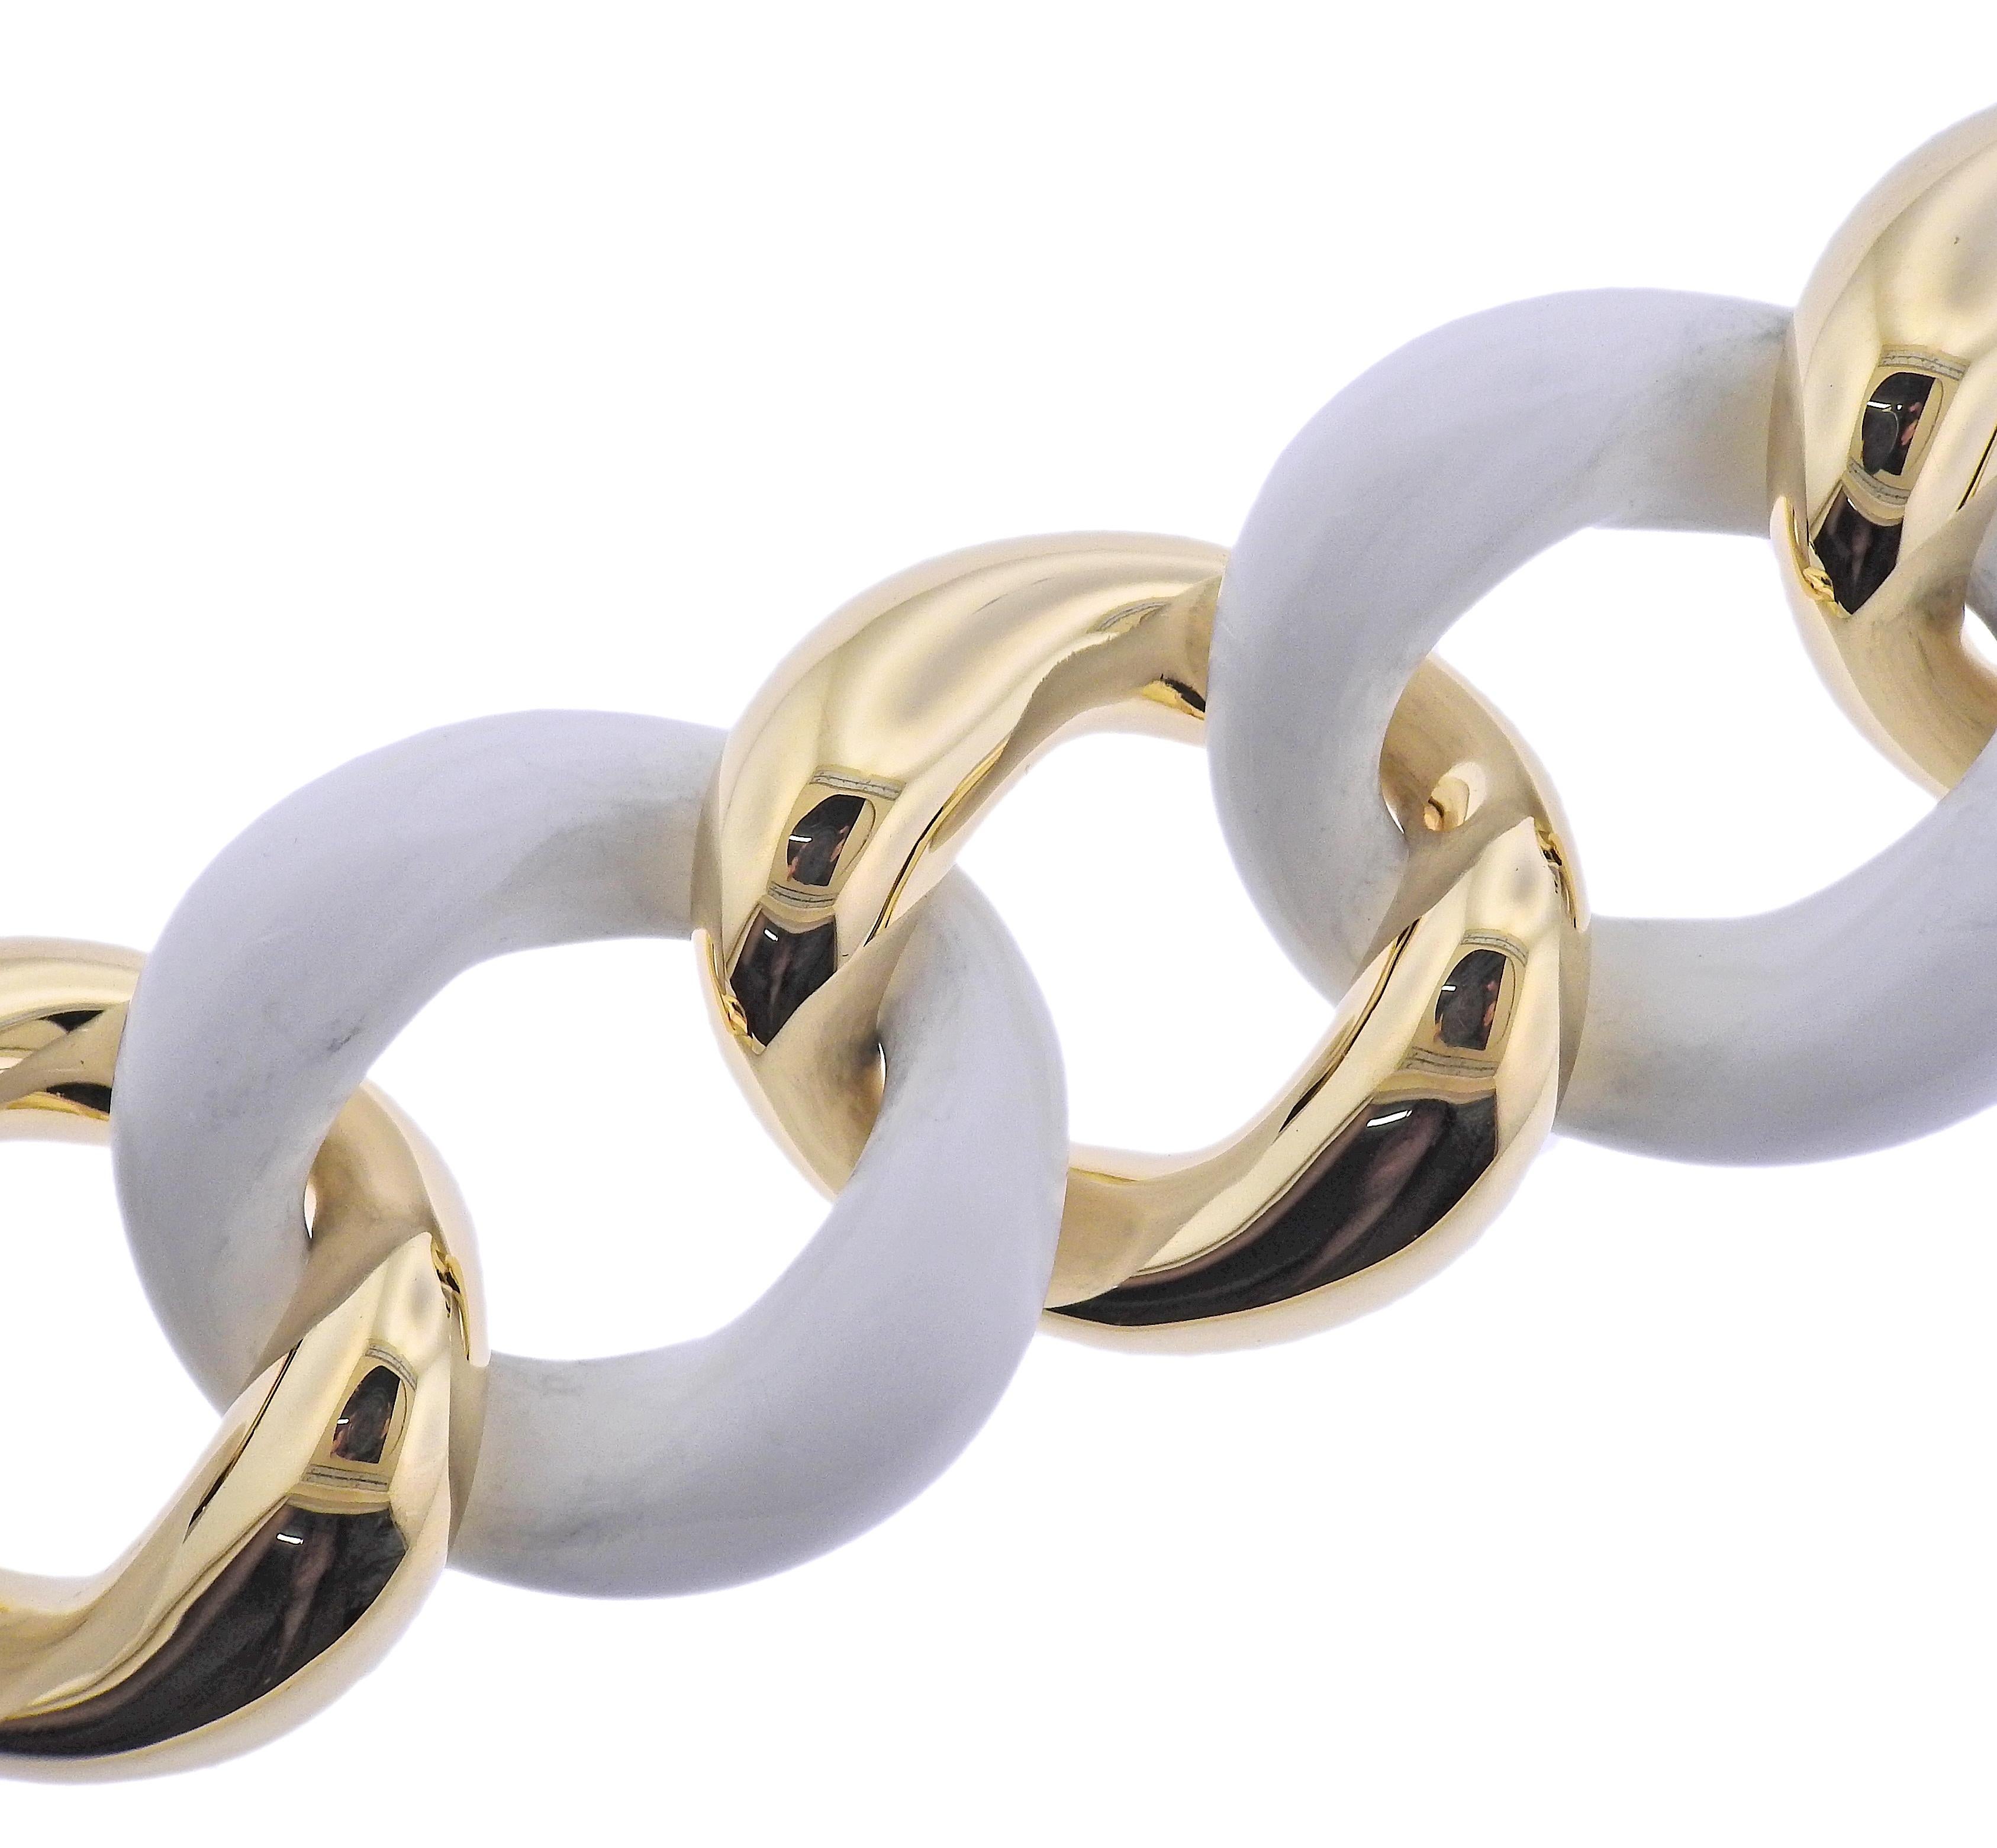 Brand new Seaman Schepps large link bracelet in 18k gold with white ceramic. Comes with box. Bracelet is 7.75